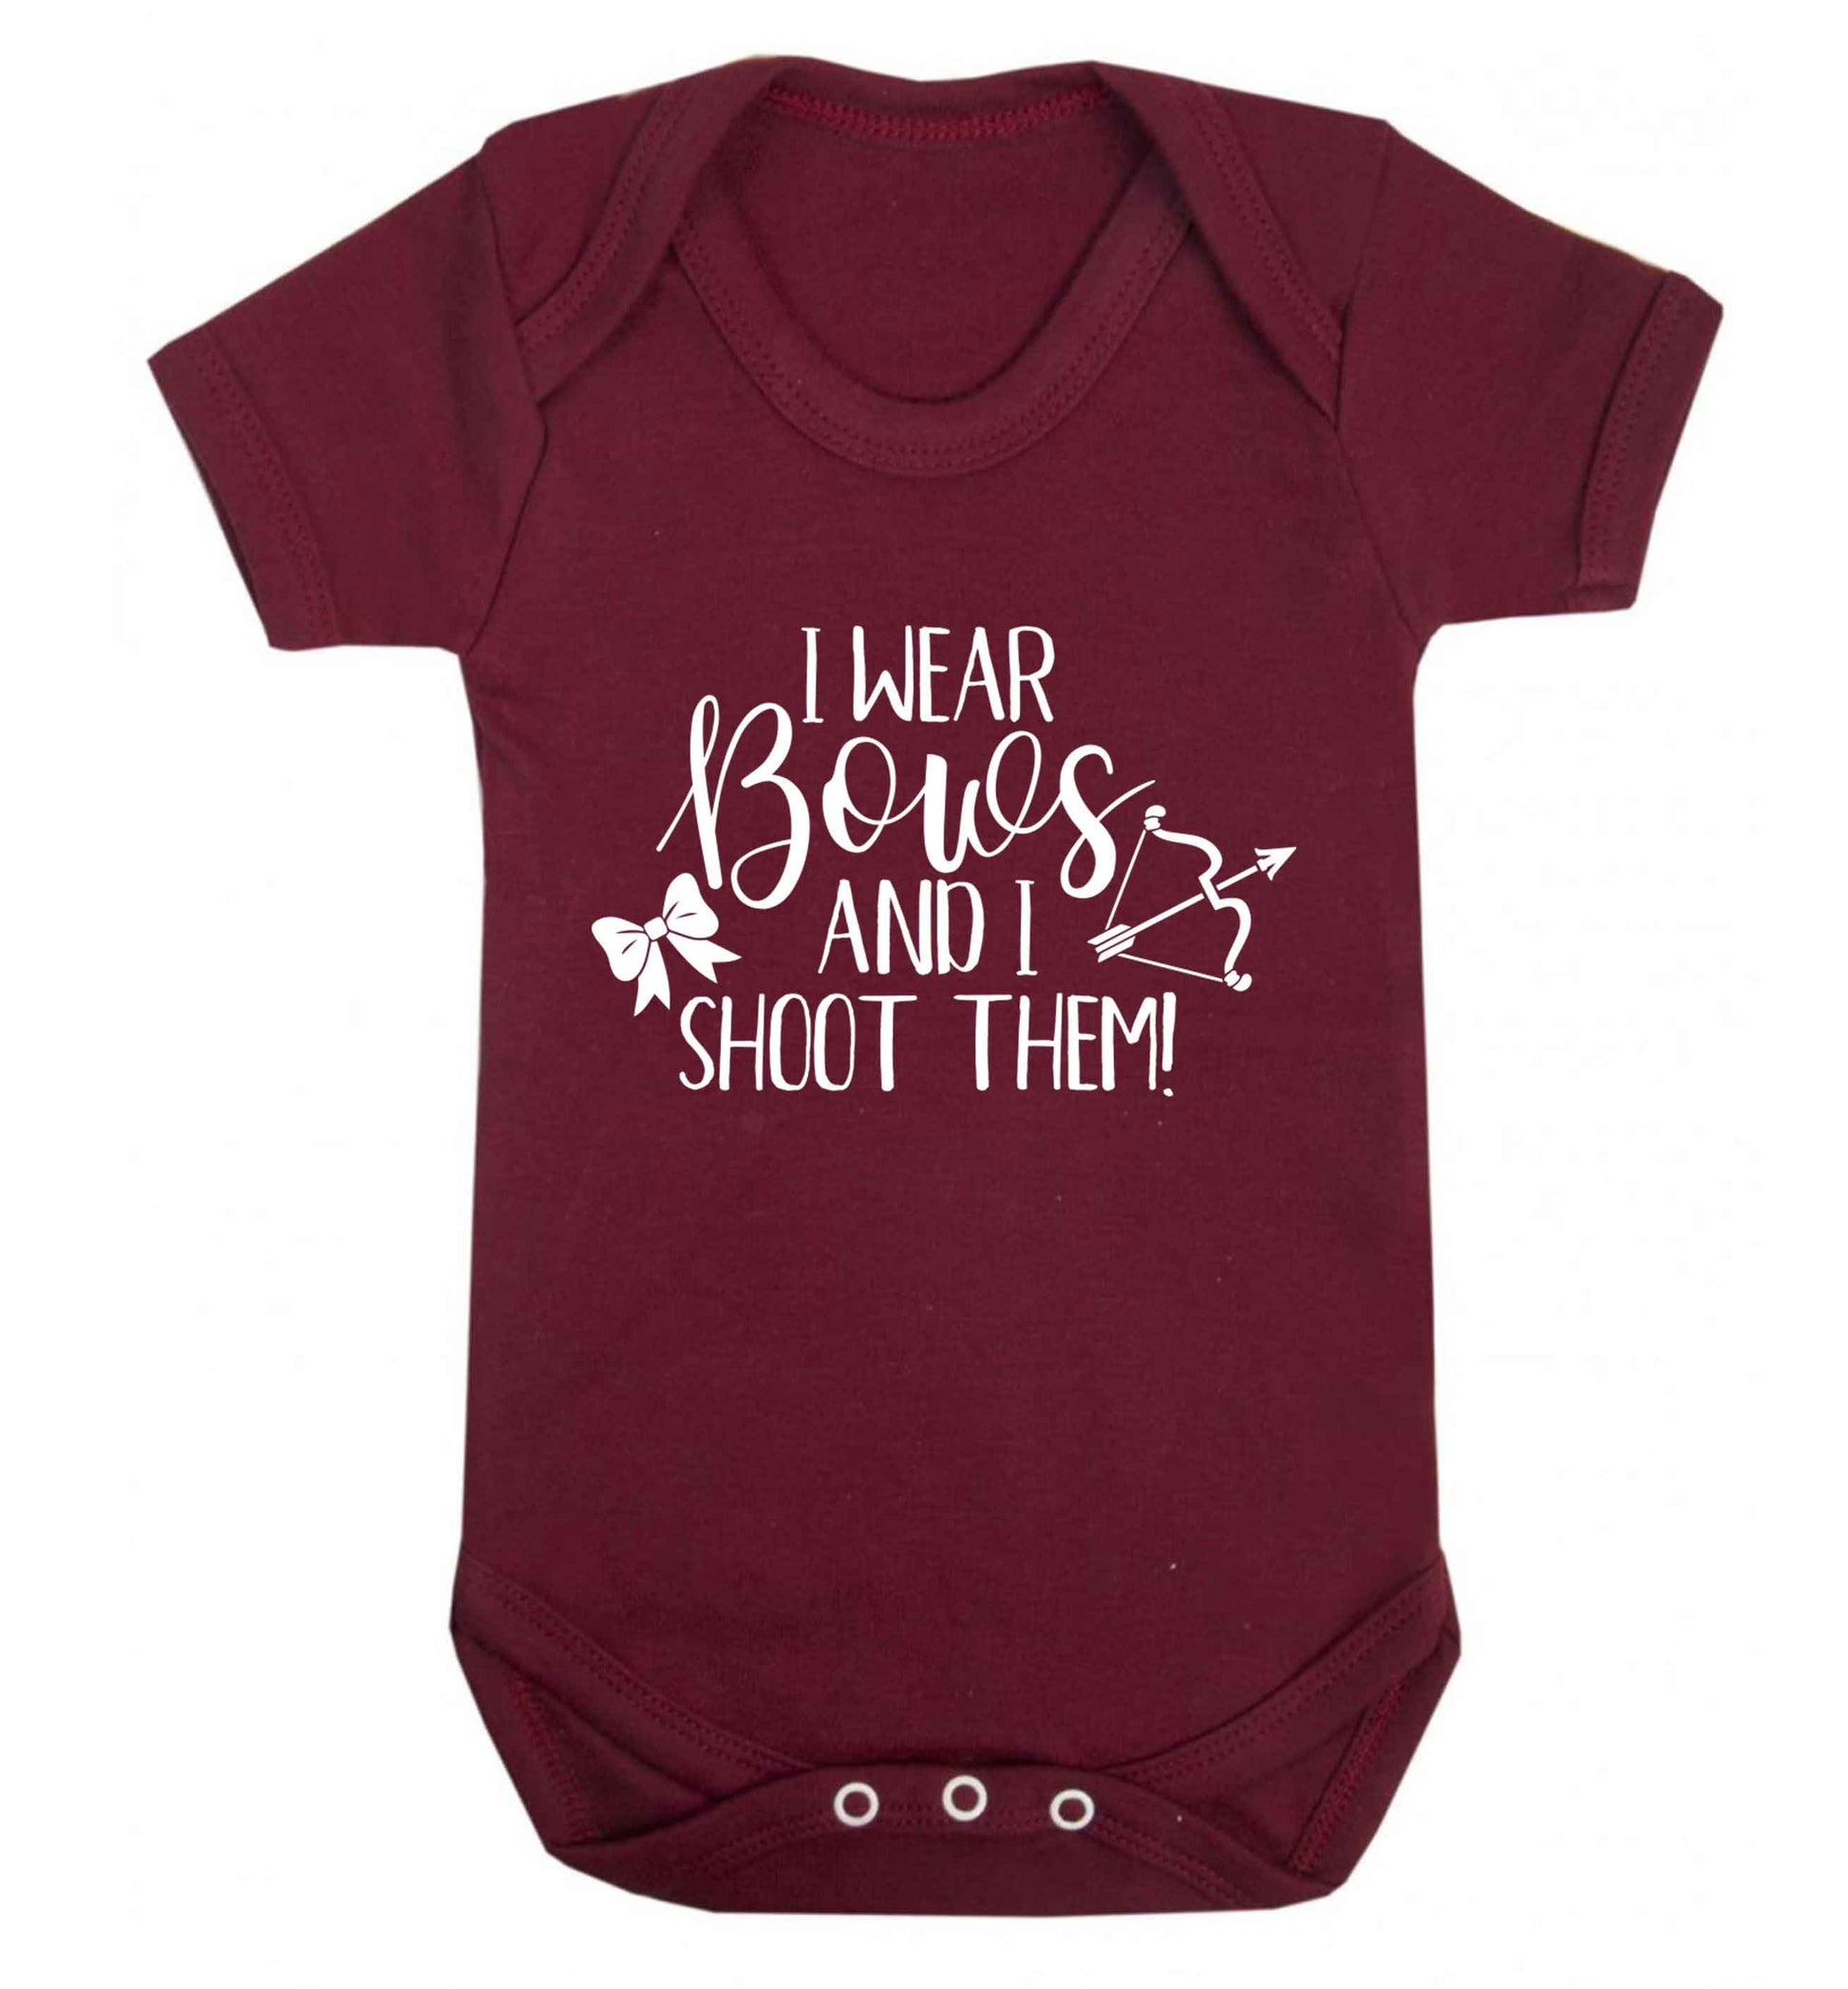 I wear bows and I shoot them Baby Vest maroon 18-24 months